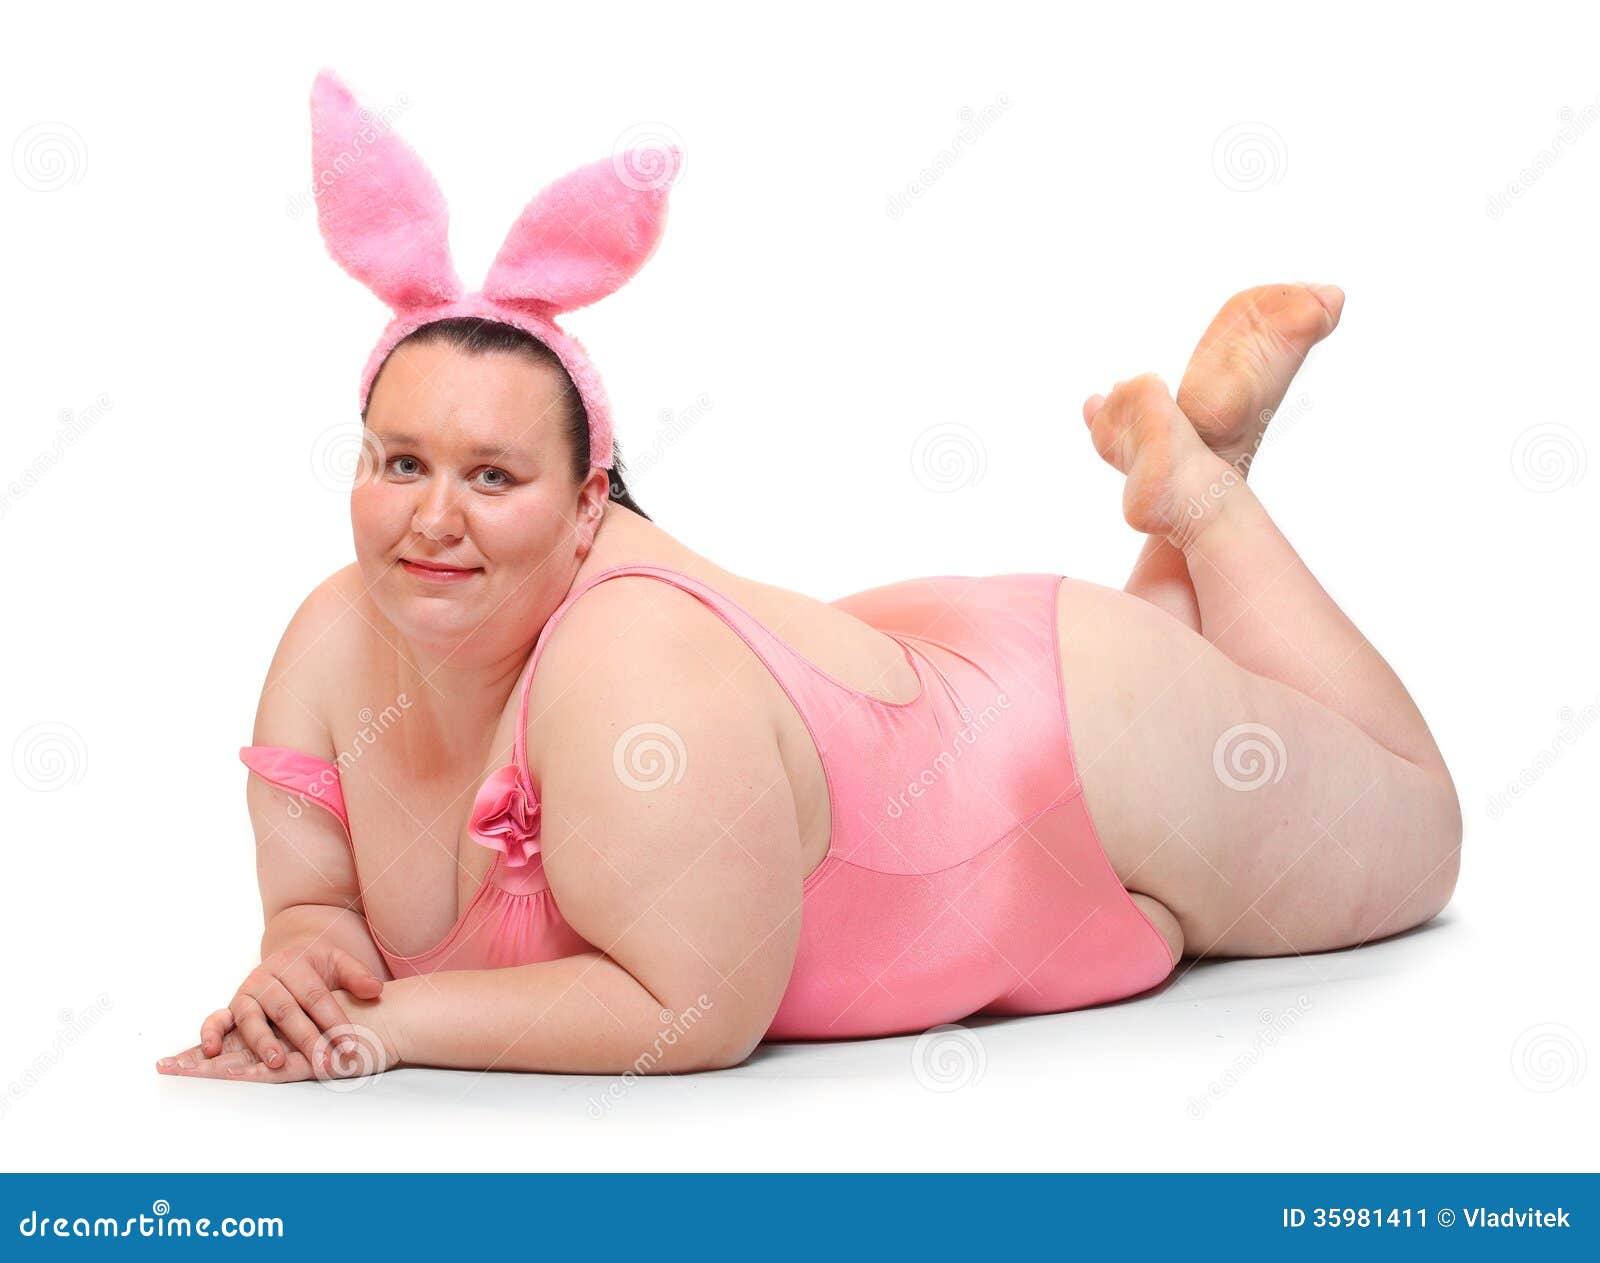 funny-pink-bunny-picture-plus-size-woman-swimsuit-rabbit-ears-picture-easter-greetings-35981411.jpg